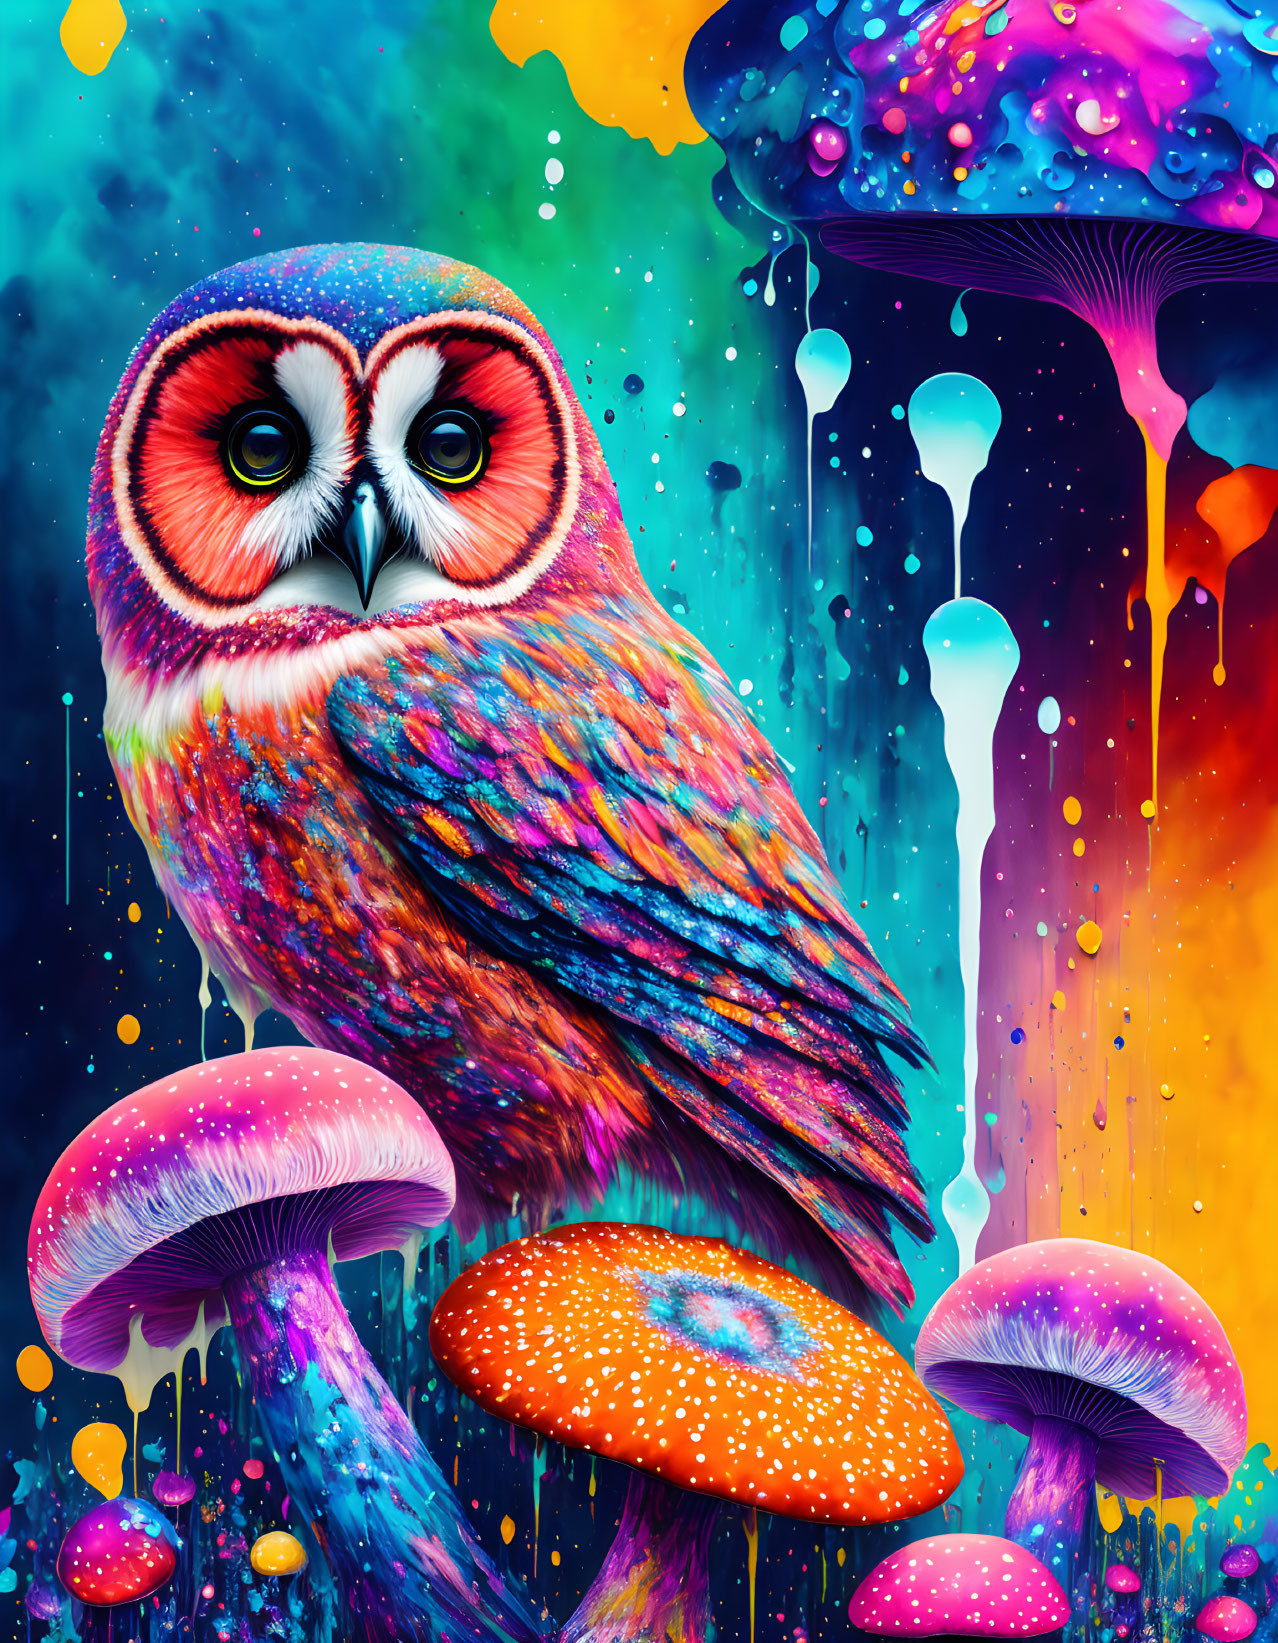 The Owl and the Mushrooms.